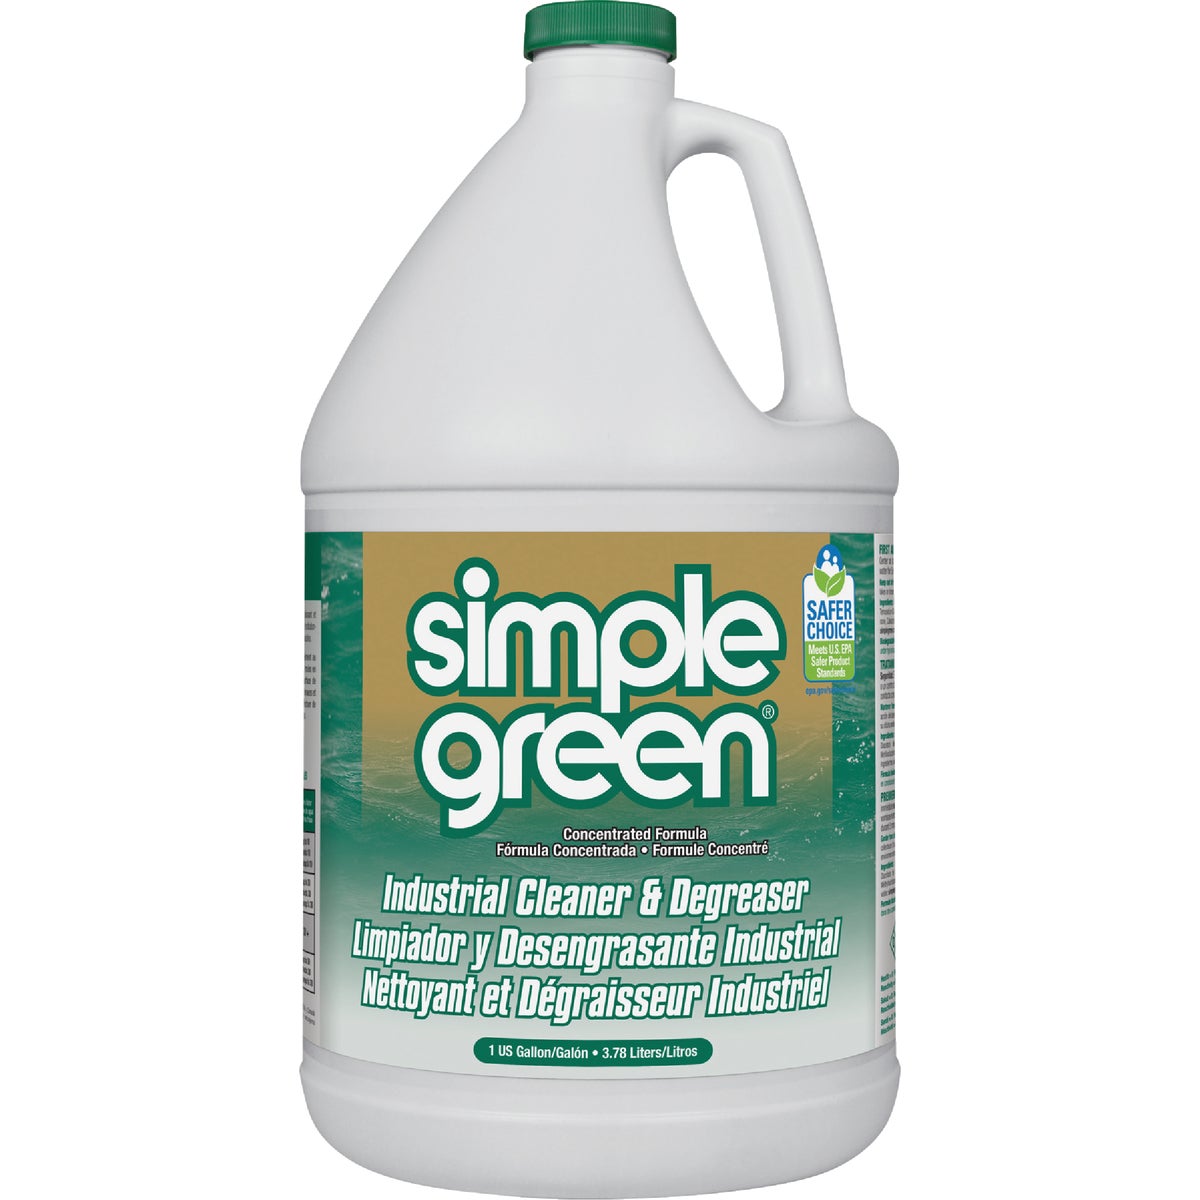 Item 602280, Simple Green Industrial Cleaner and Degreaser provides a safer alternative 